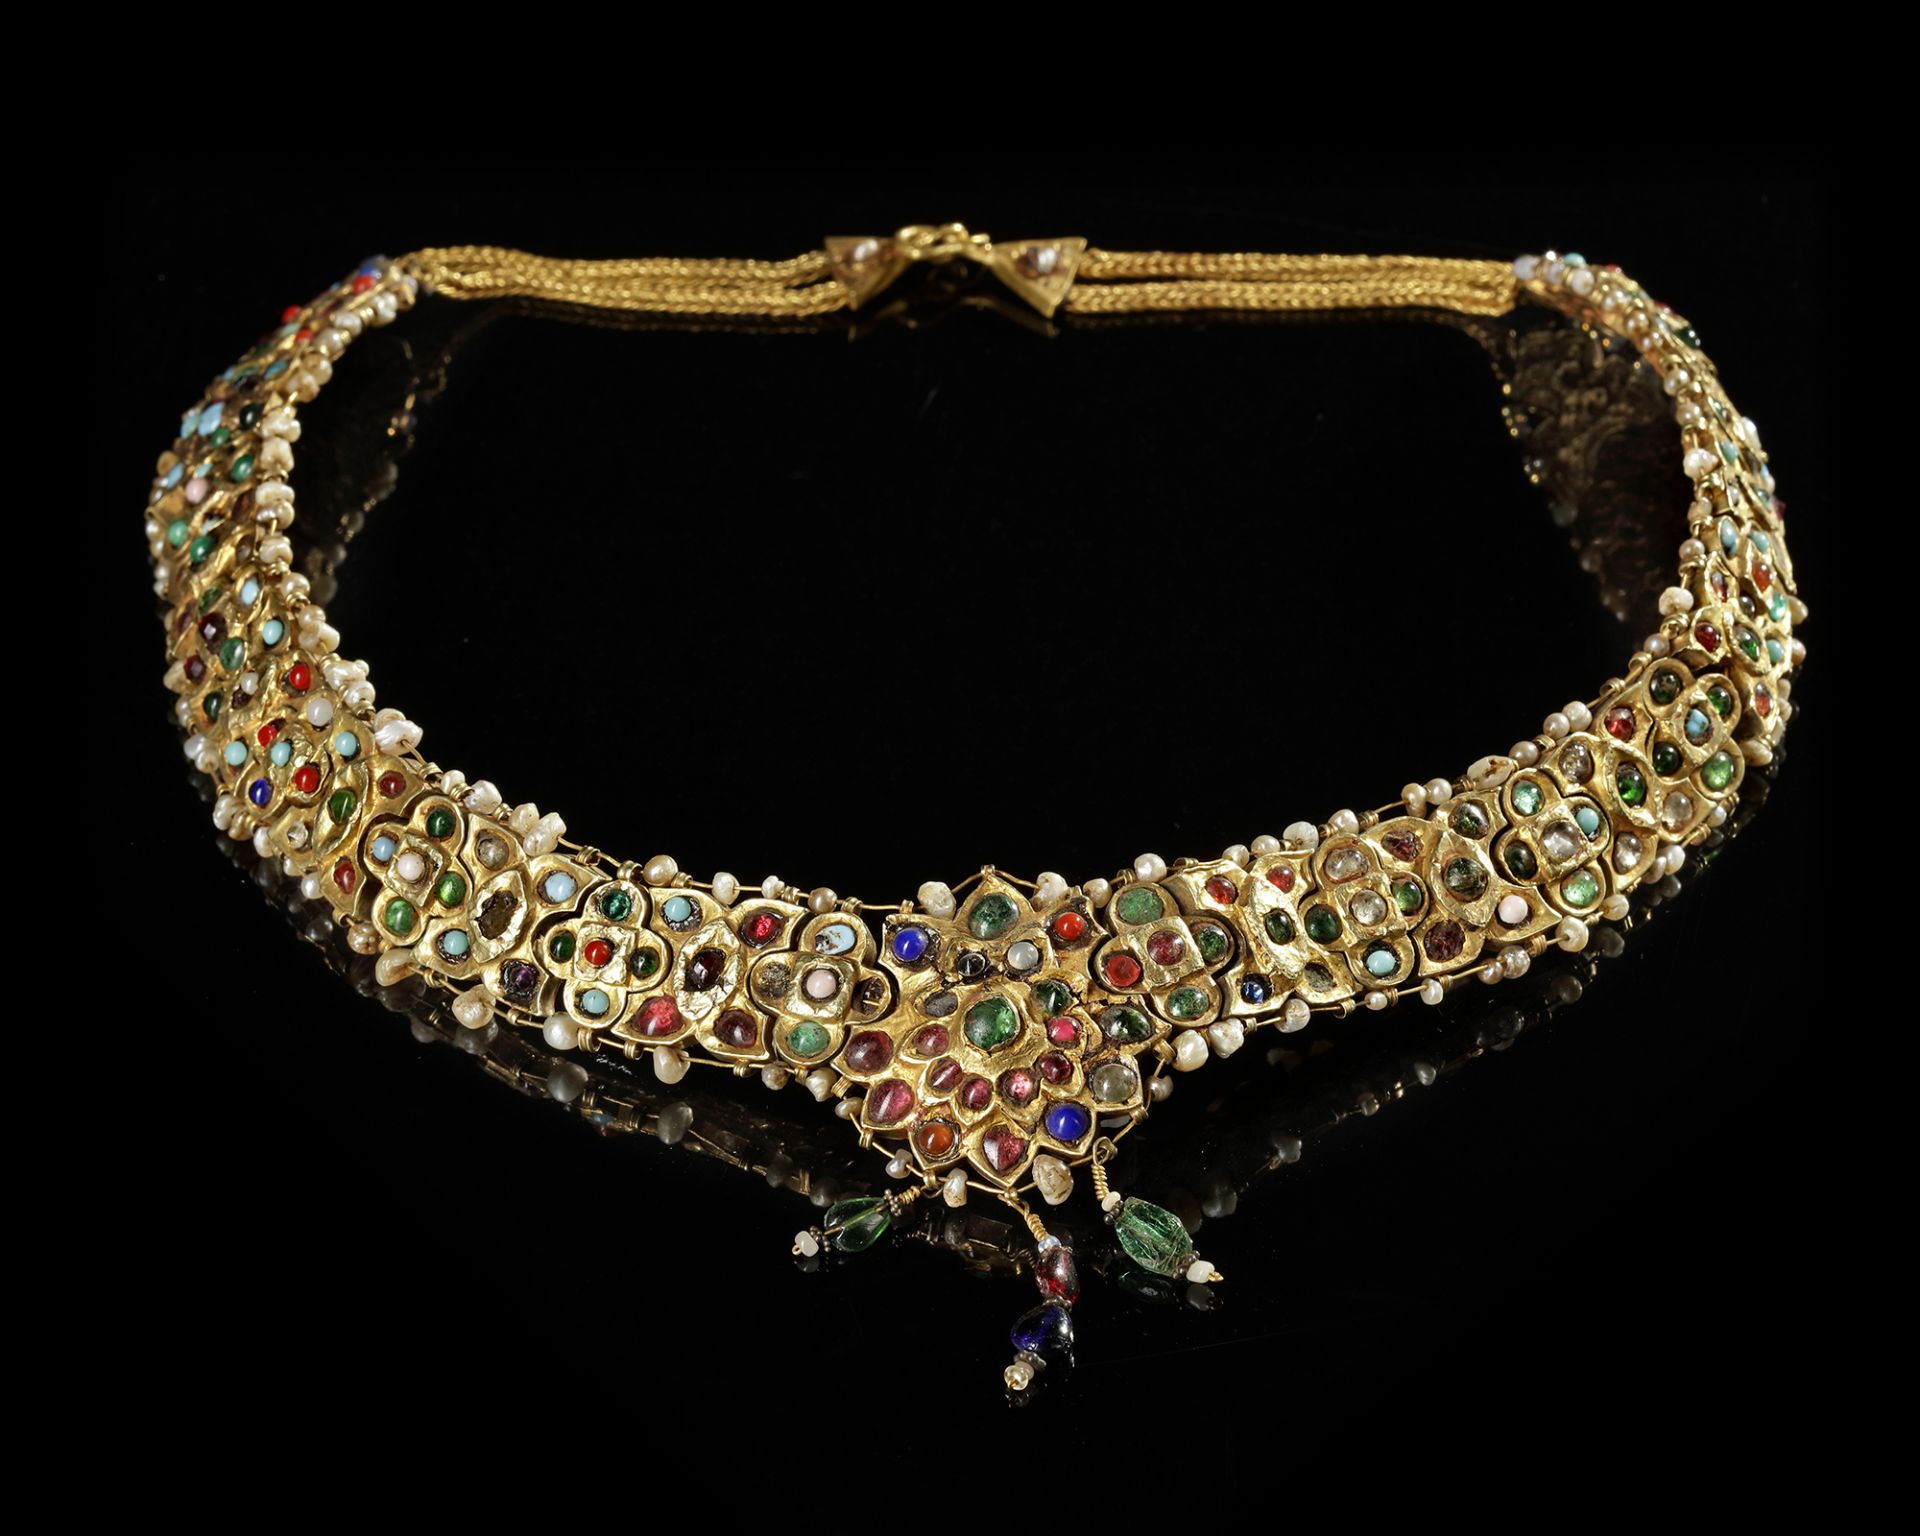 A MUGHAL GEM-SET ENAMELED GOLD NECKLACE, LATE 18TH CENTURY - Image 2 of 4